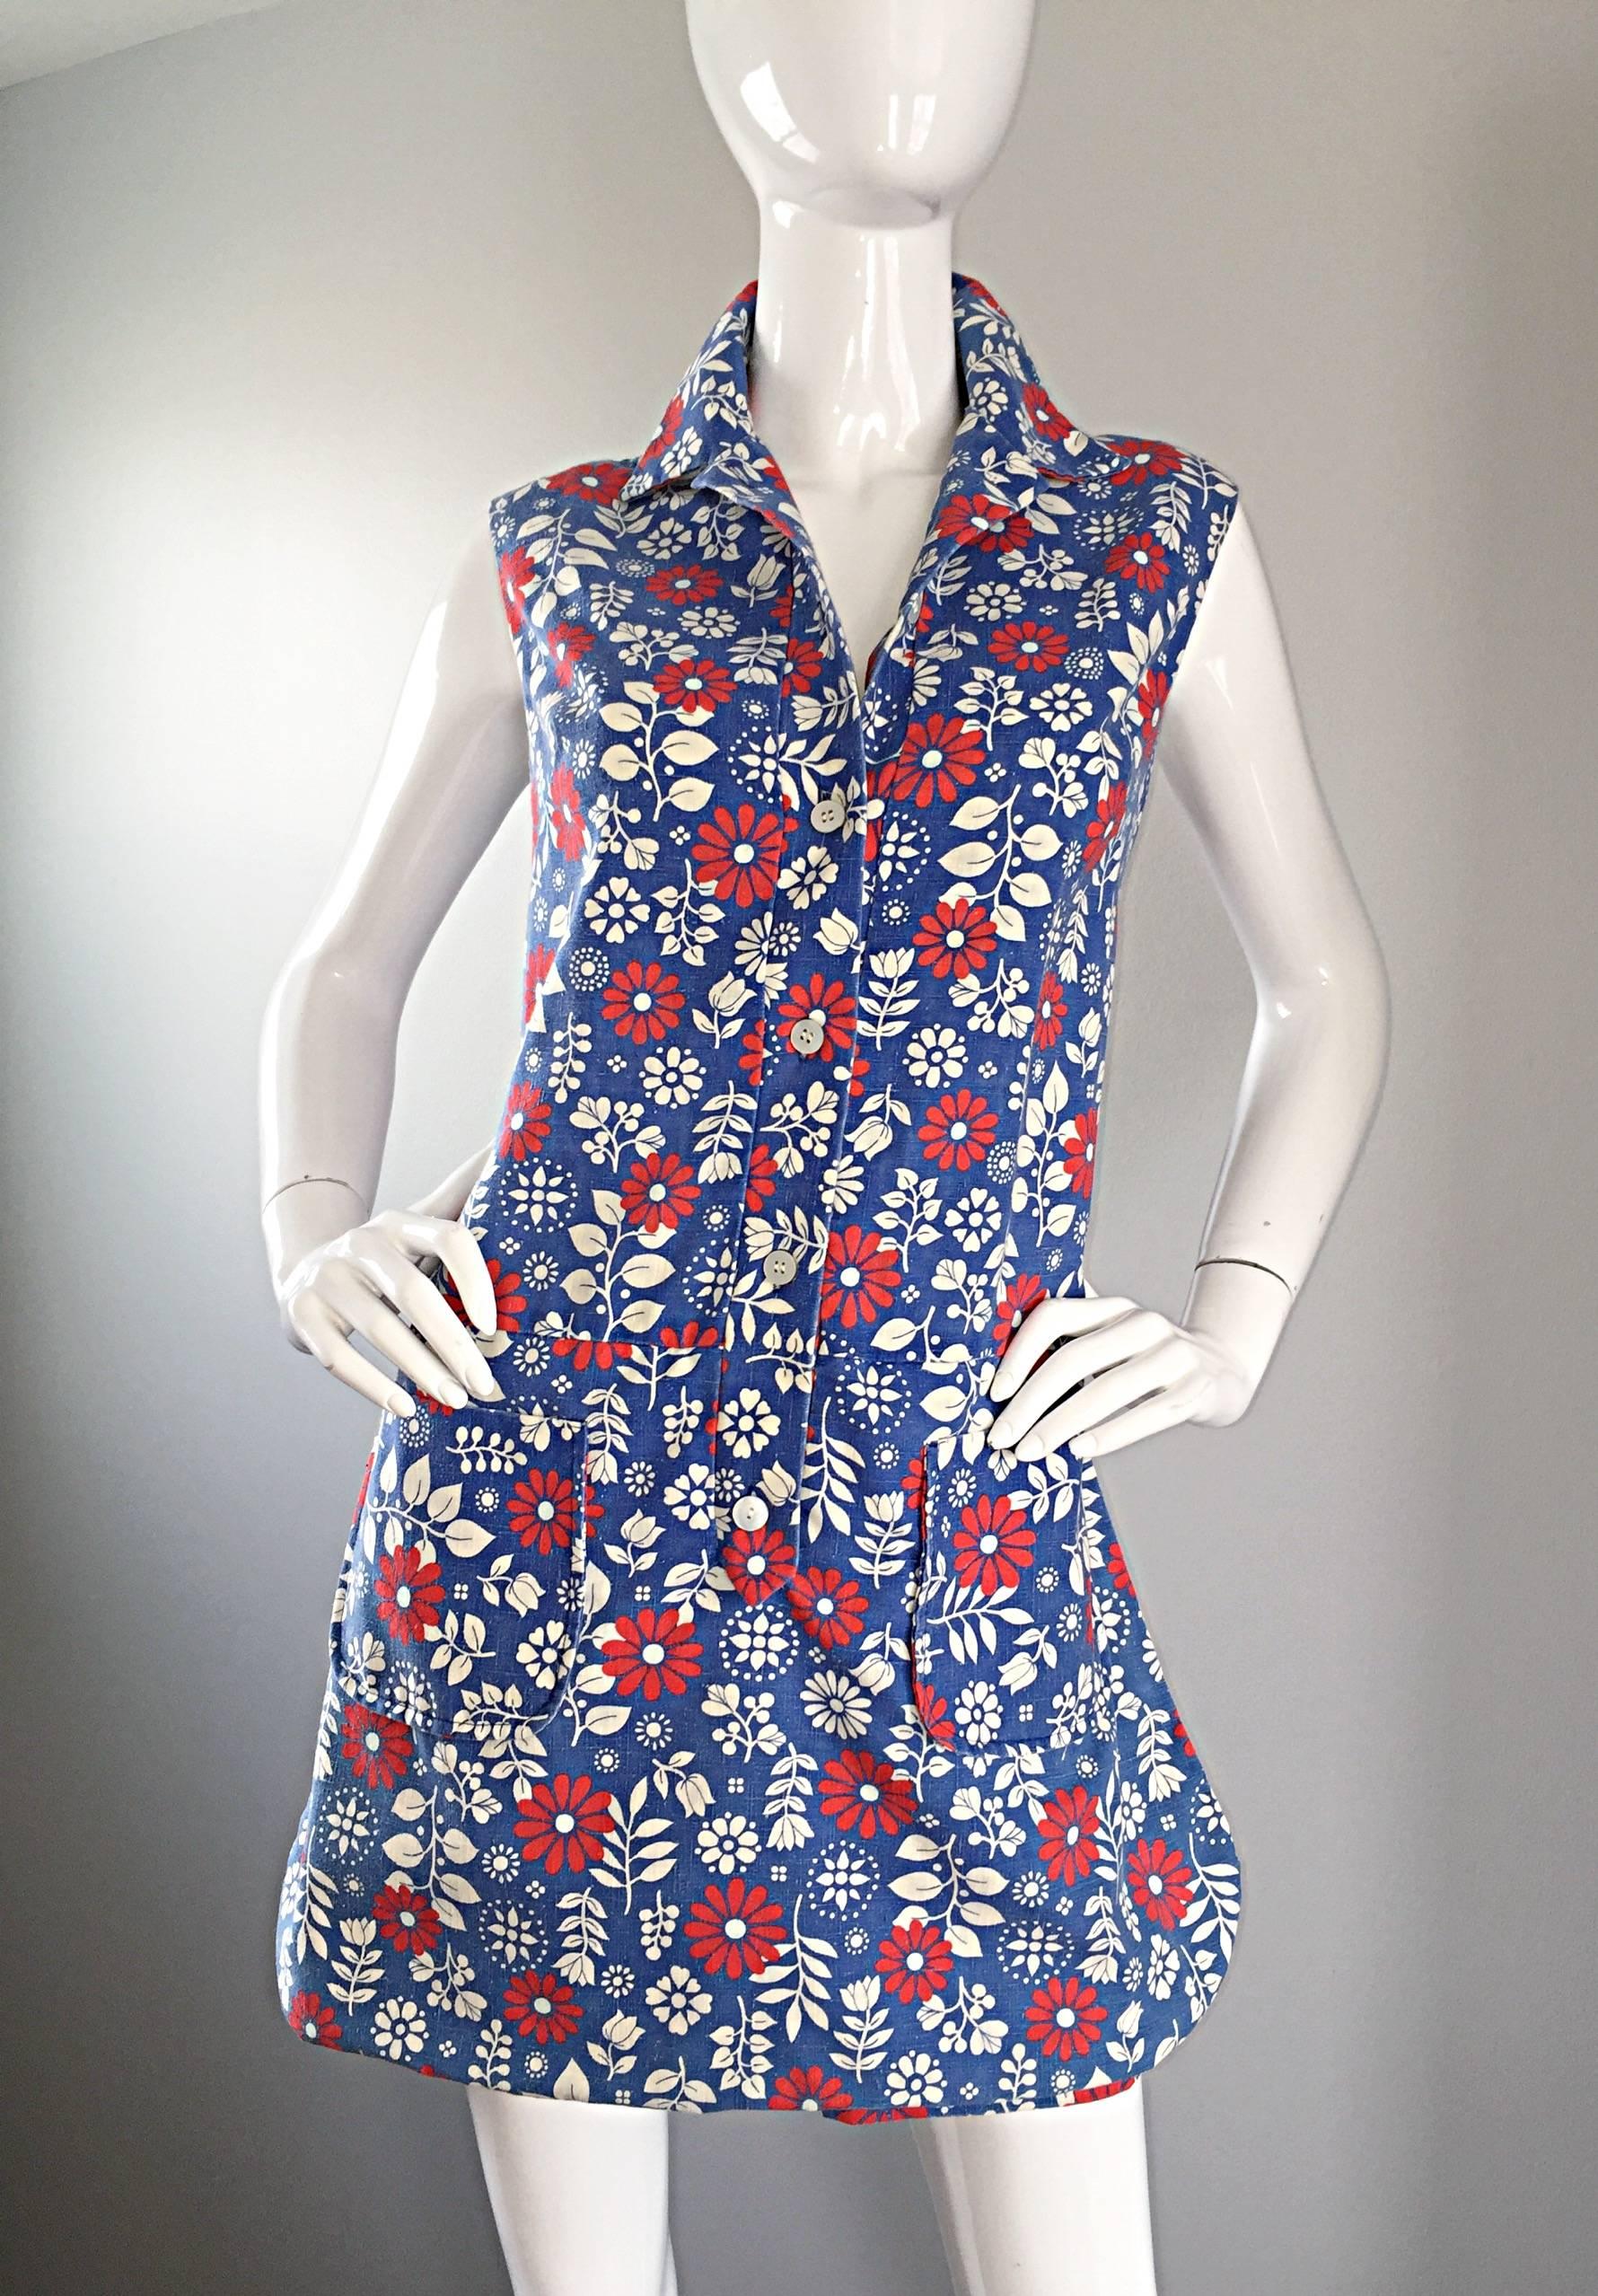 Rare 1960s Abercrombie & Fitch Romper Jumpsuit with Skort Red White & Blue For Sale 1